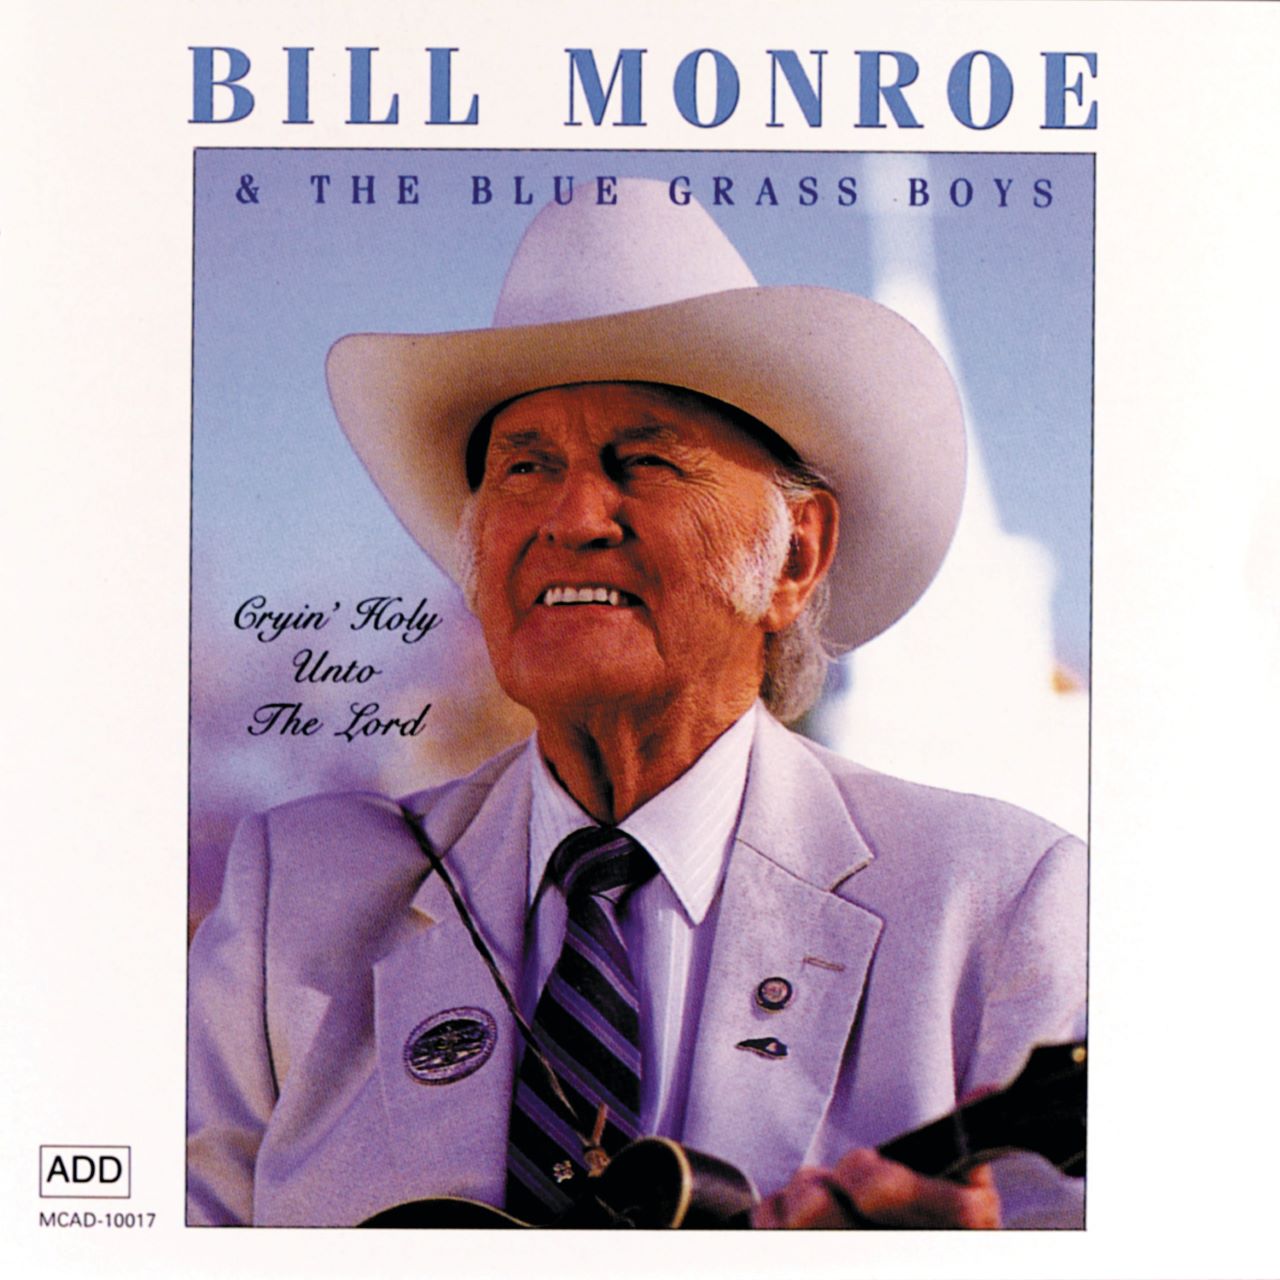 Bill Monroe - Cryin’ Holy Unto The Lord cover album